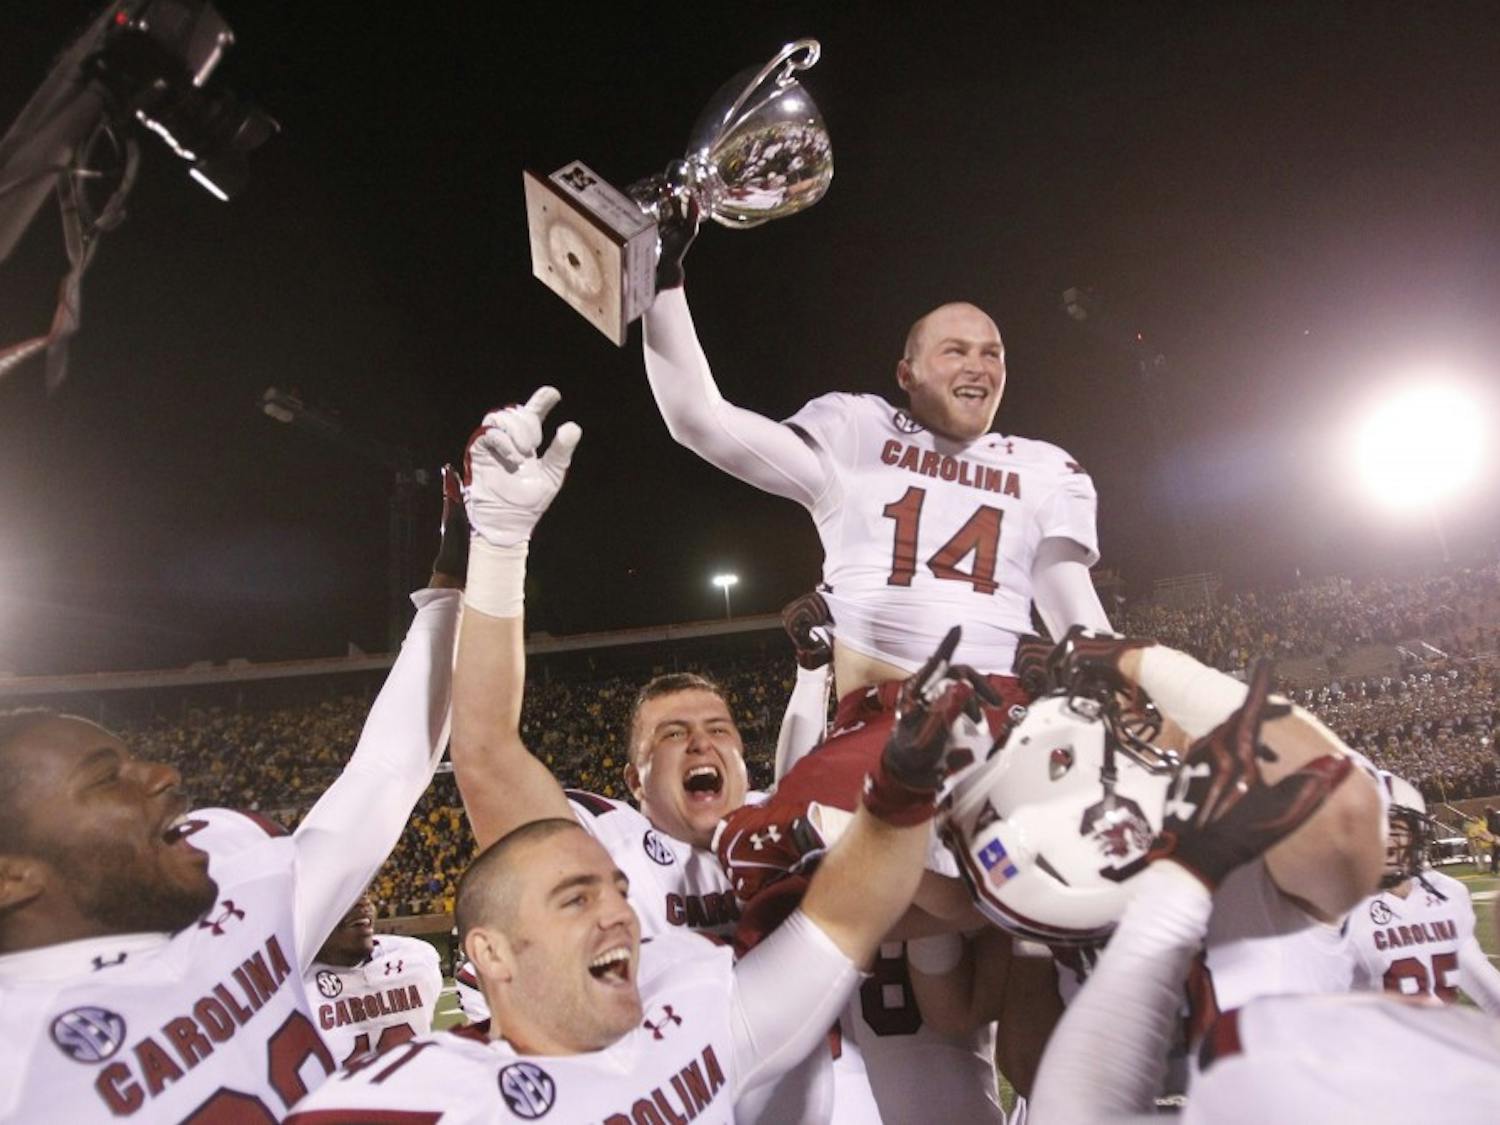 The South Carolina Gamecocks quarterback Connor Shaw (14) celebrates with teammates after defeating the Missouri Tigers, 27-24 in overtime at Memorial Stadium's Faurot Field in Columbia, Missouri, on Saturday, October 26, 2013. (Allison Long/Kansas City Star/MCT)